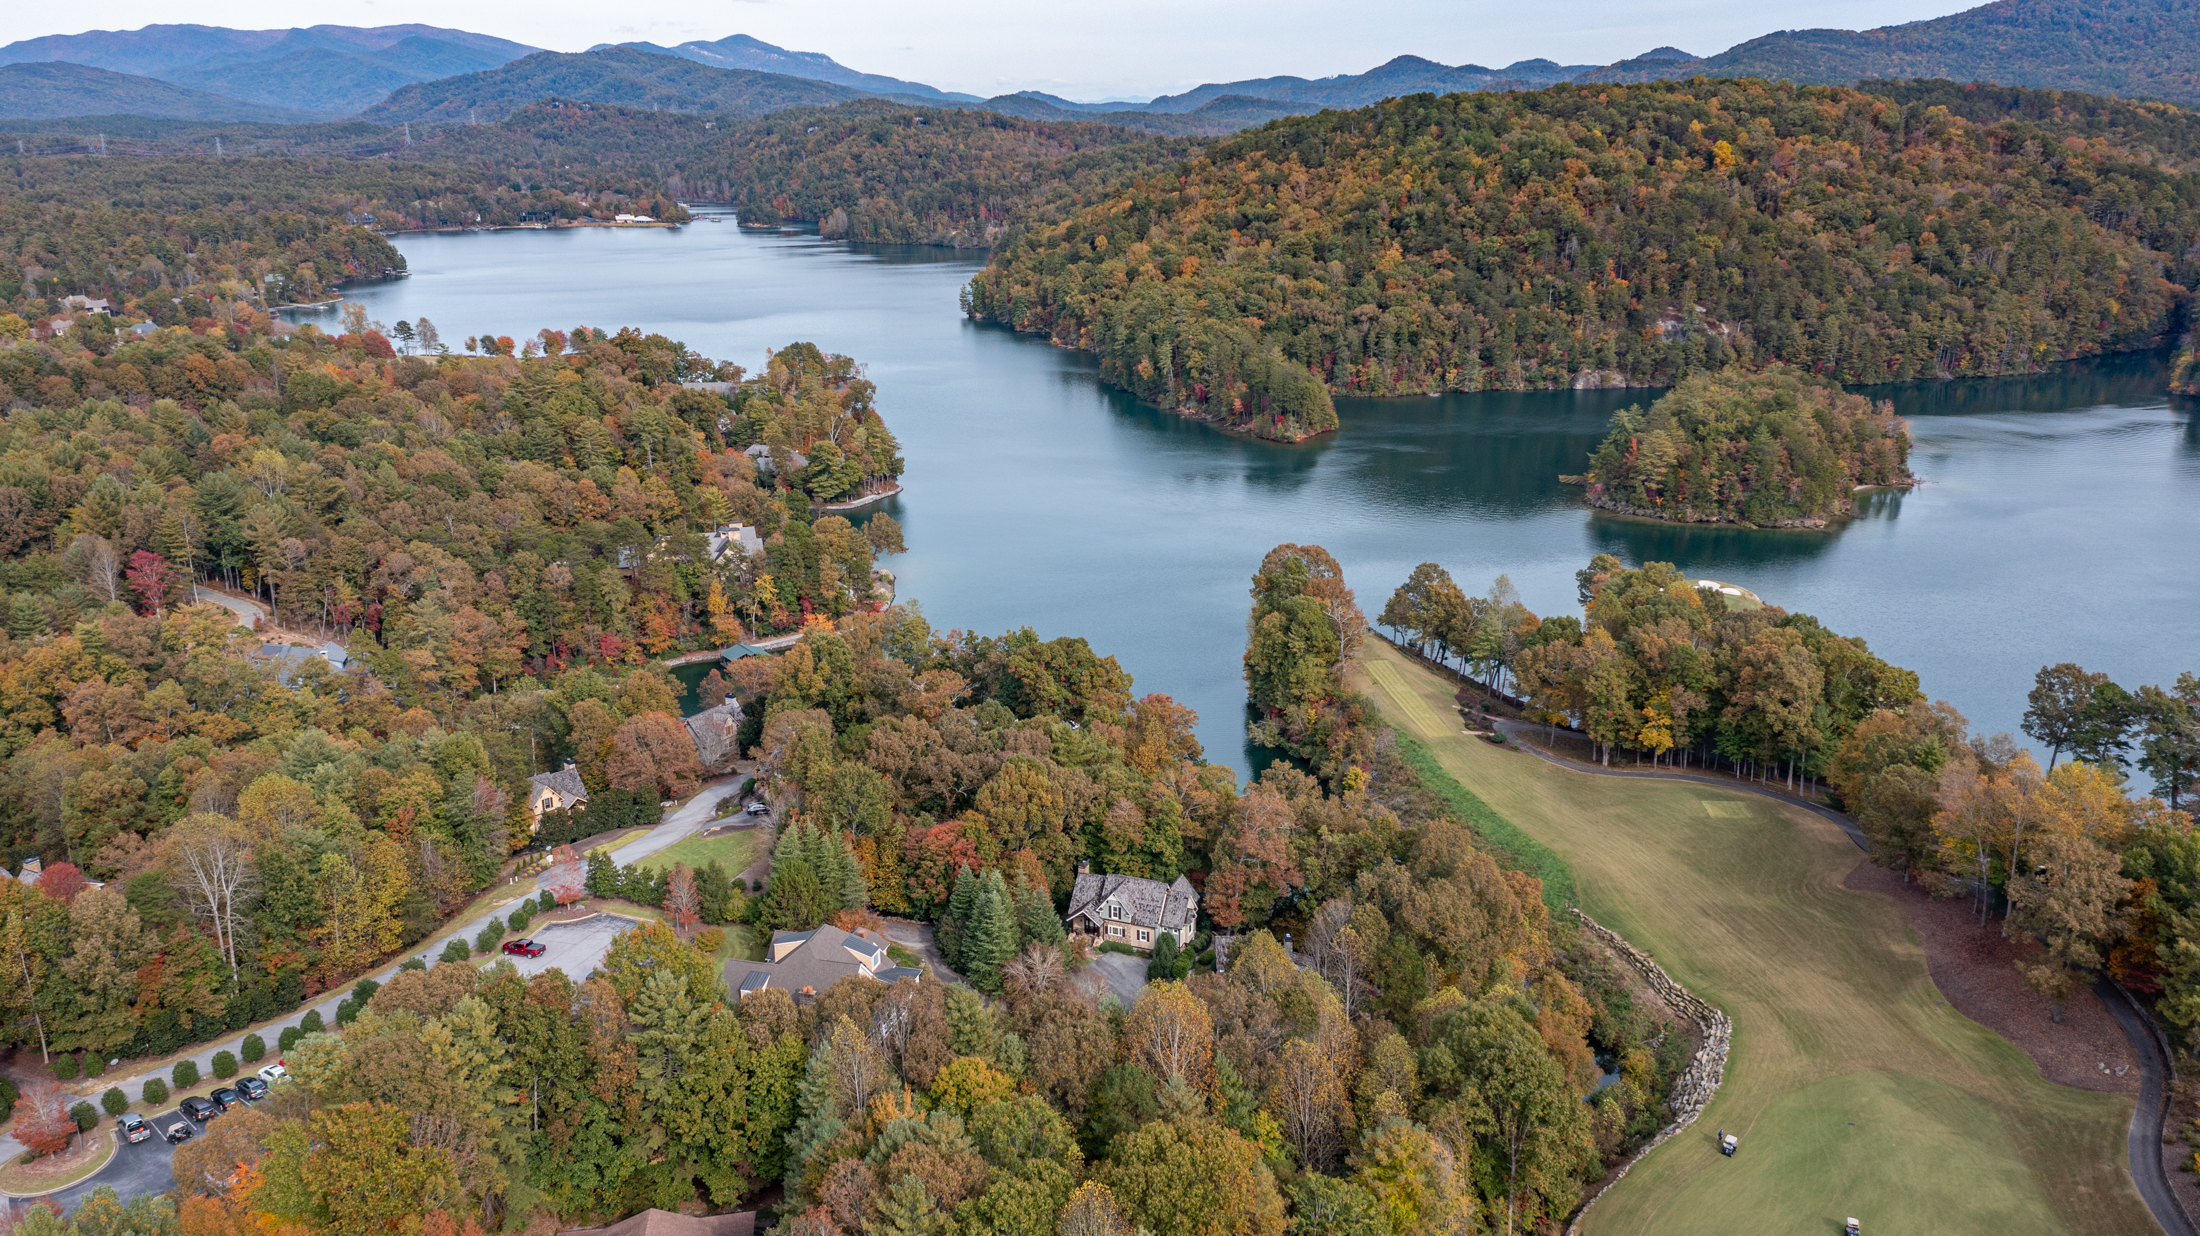 An overhead view of Lake Keowee and with some of the houses and expanses of trees on the other side.